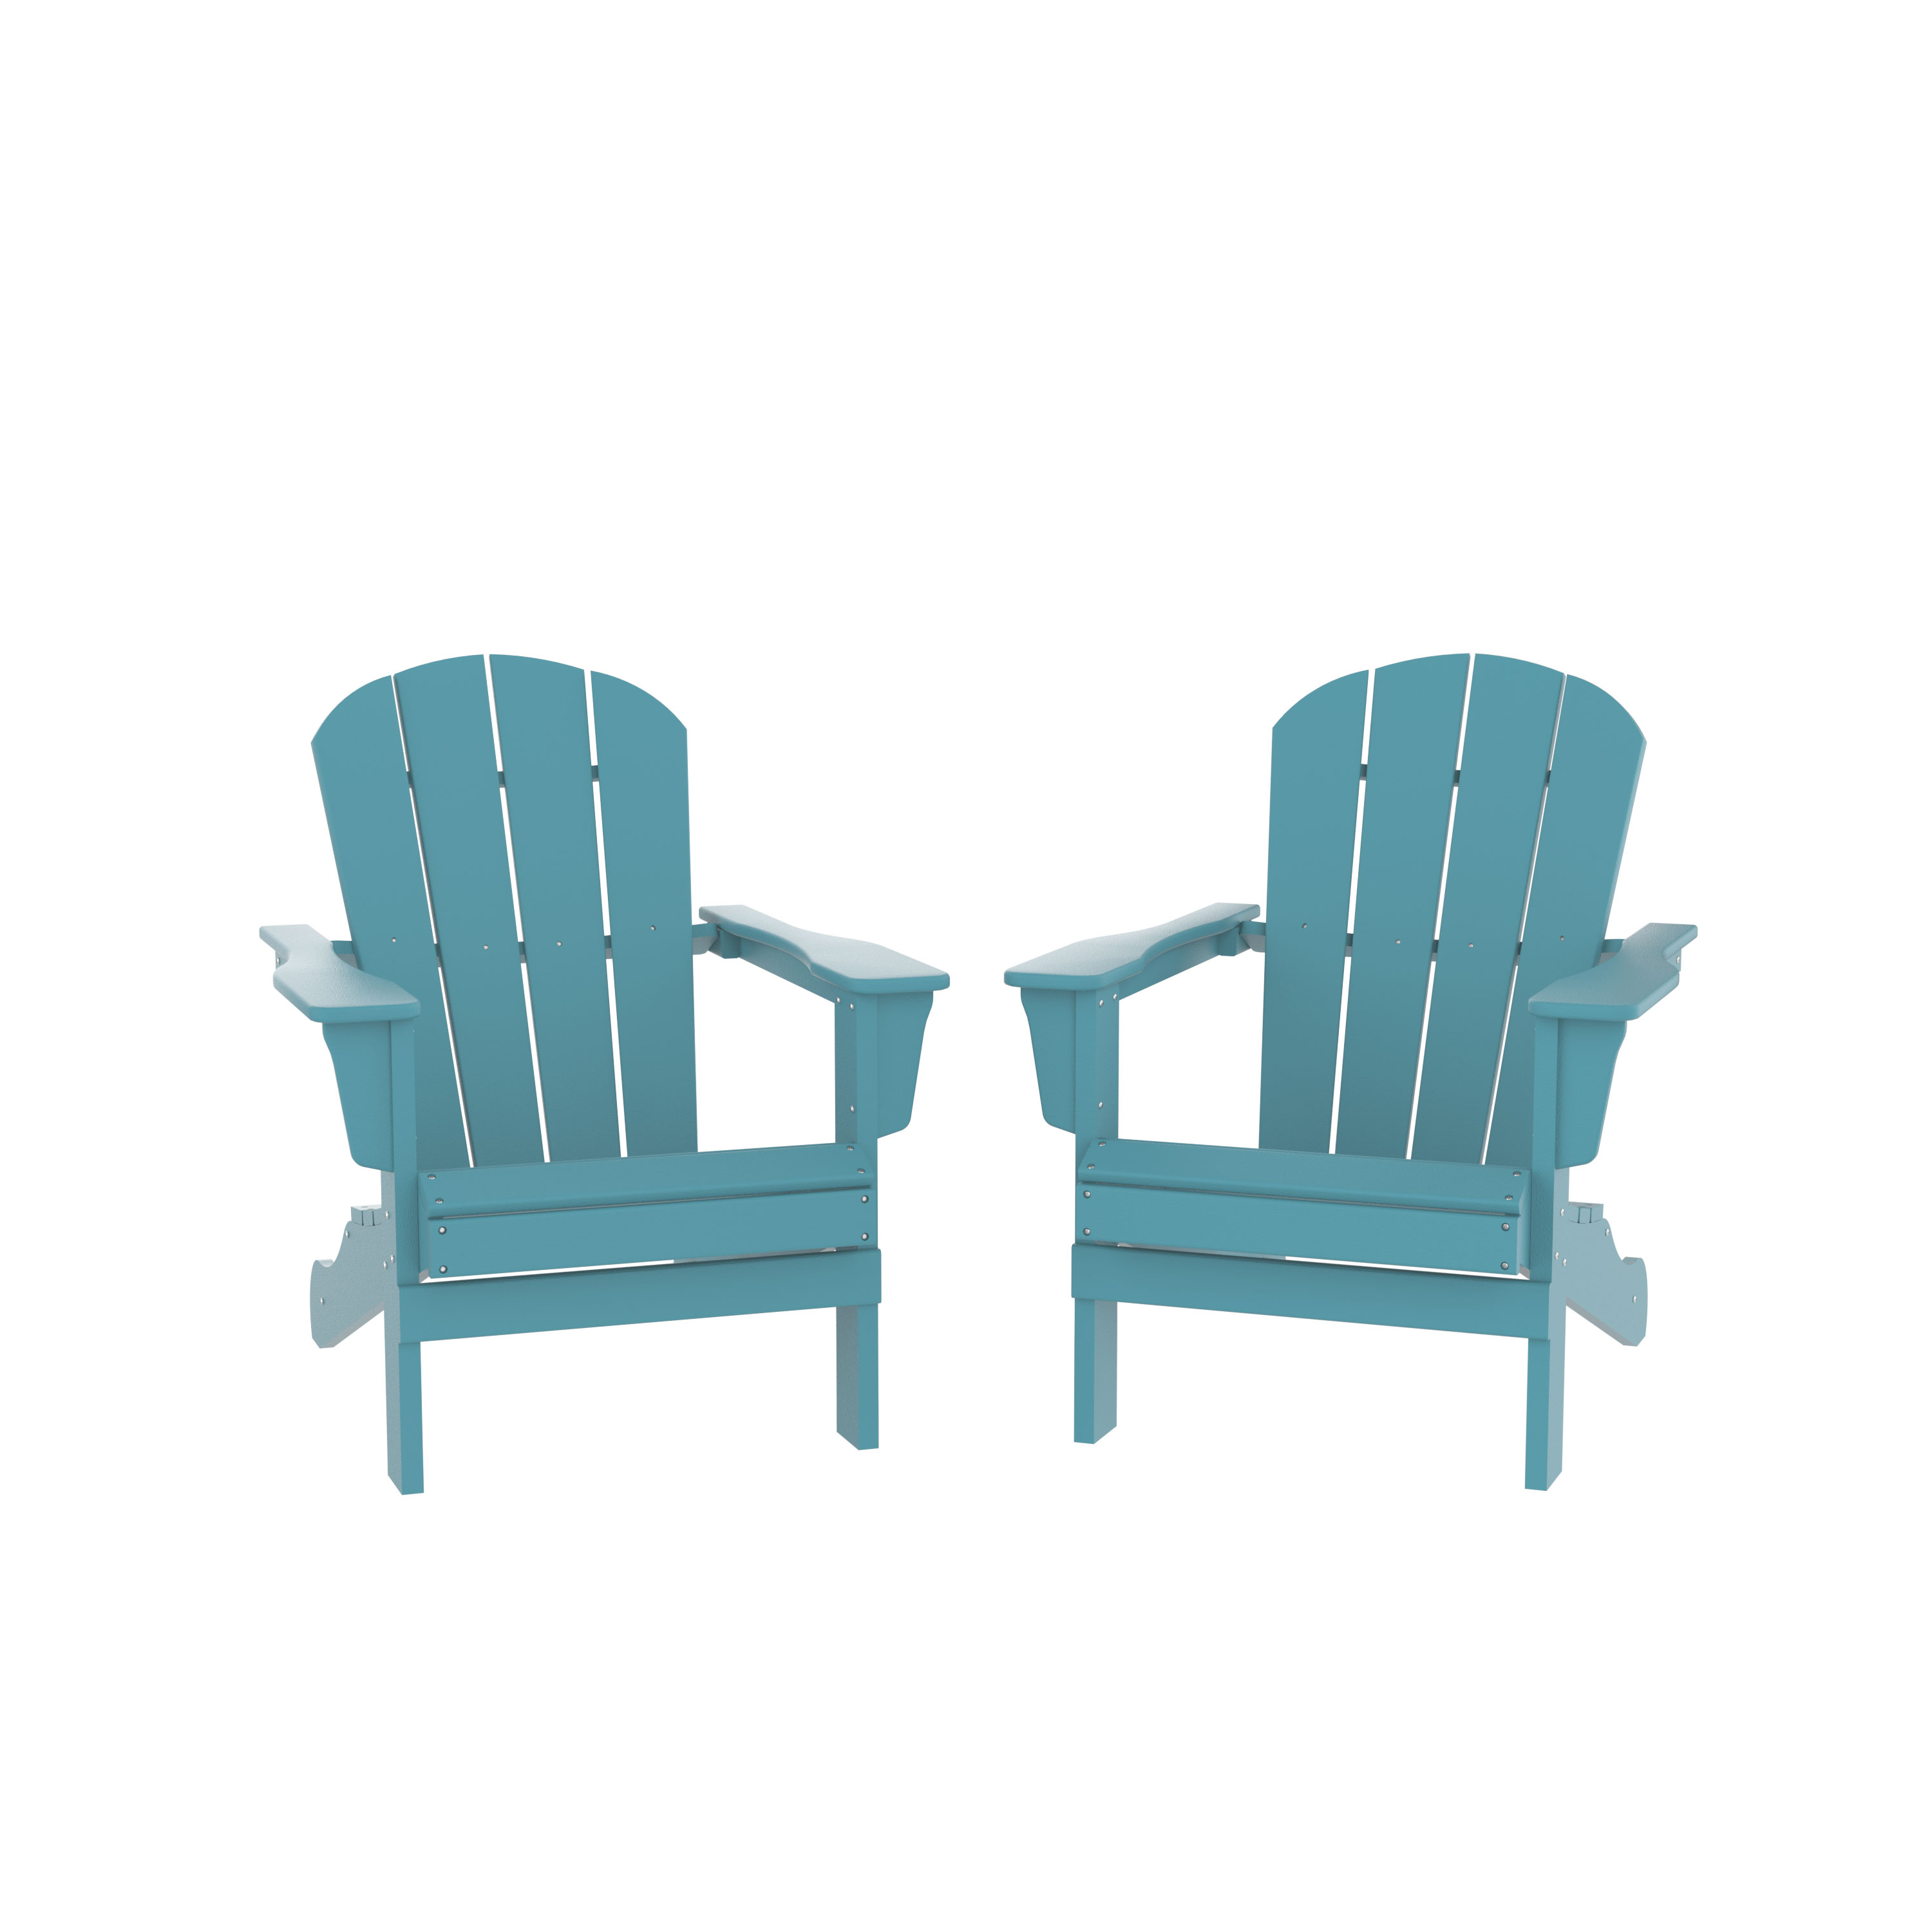 Adirondack Chair, Fire Pit Chairs, Sand Chair, Patio Outdoor Chairs, Dpe Plastic Resin Deck Chair, Lawn Chairs, Adult Size, Weather Resistant For Patio/ Backyard/Garden, Blue, Set Of 2 - image 4 of 6